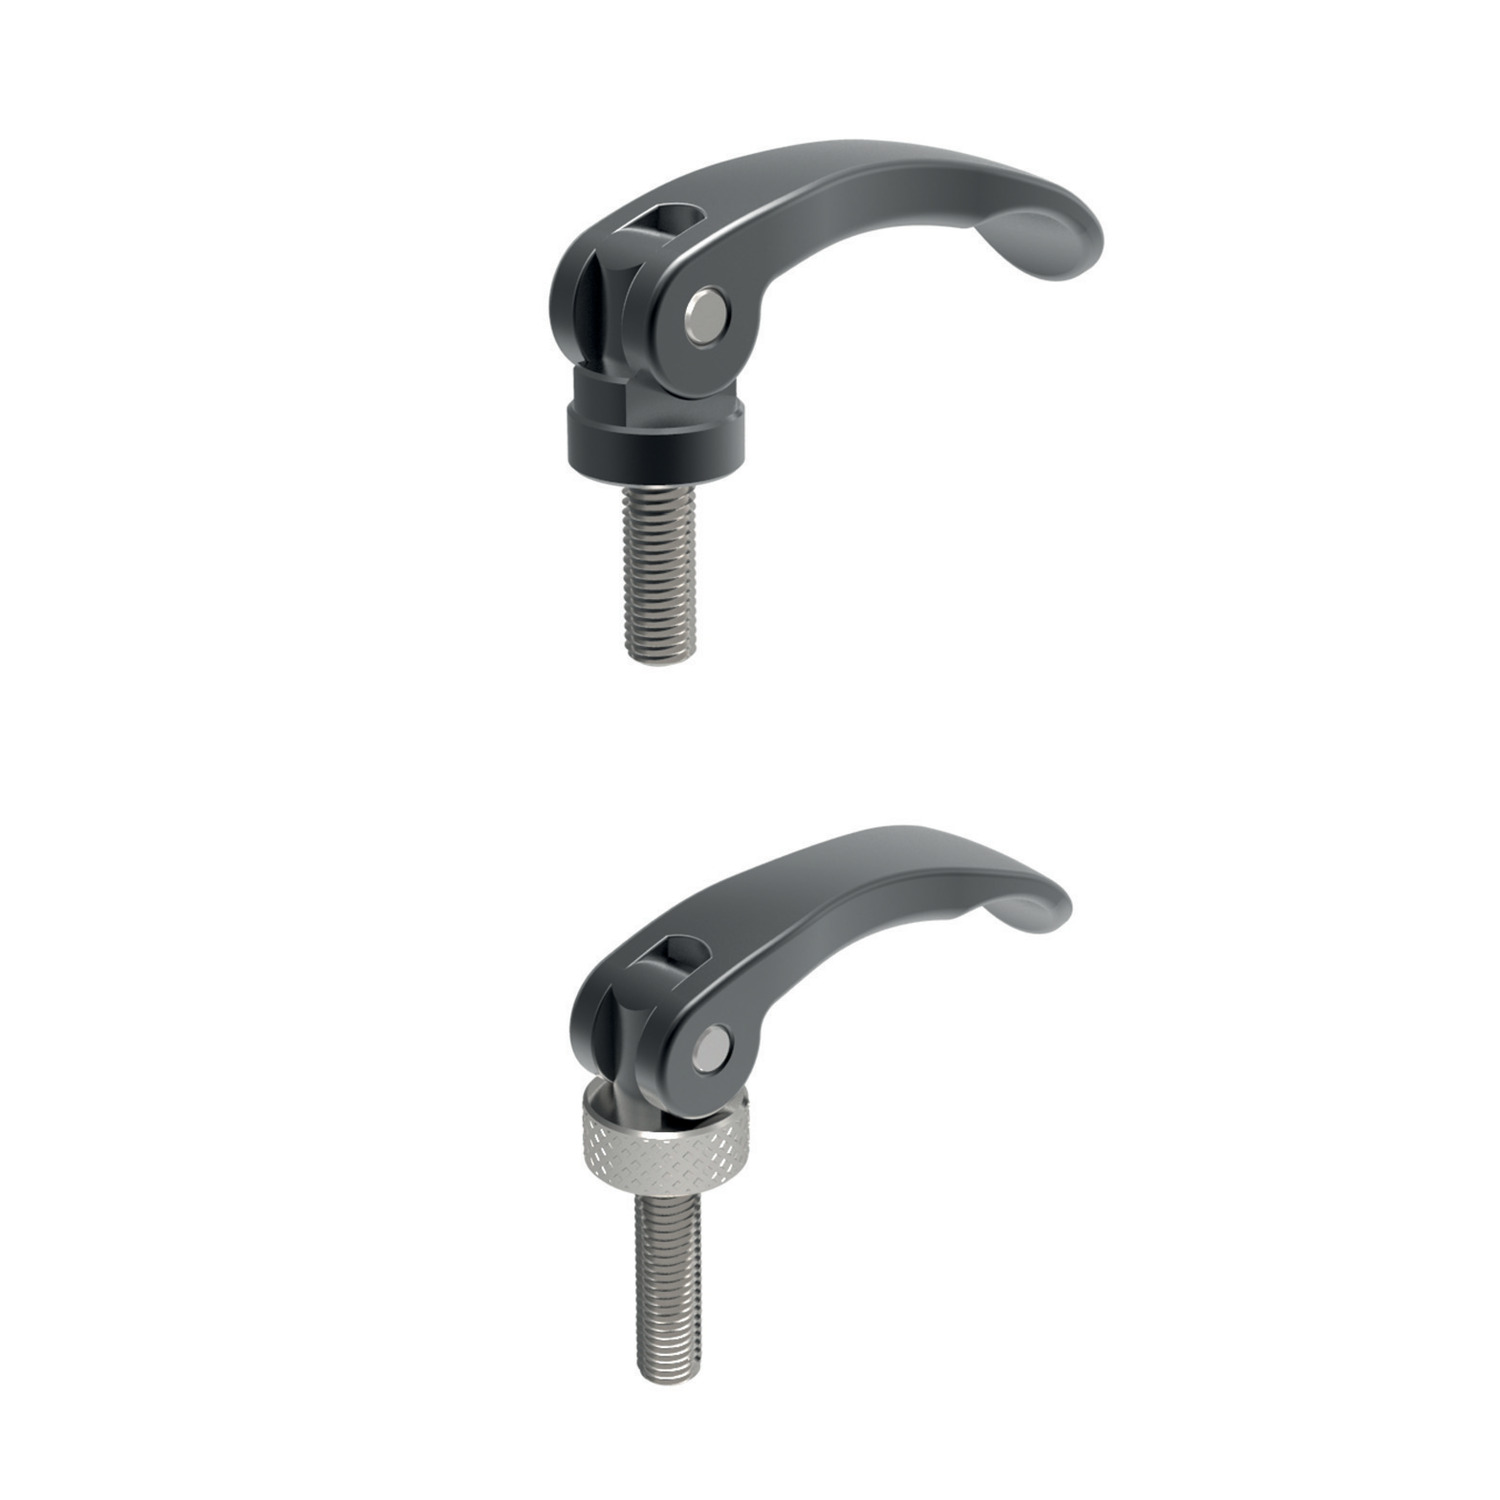 Eccentric Levers - Male Eccentric levers with grub screw made from die cast zinc. For quick and efficient clamping of workpieces, easily adjustable lever helps avoid obstruction of the workpiece.